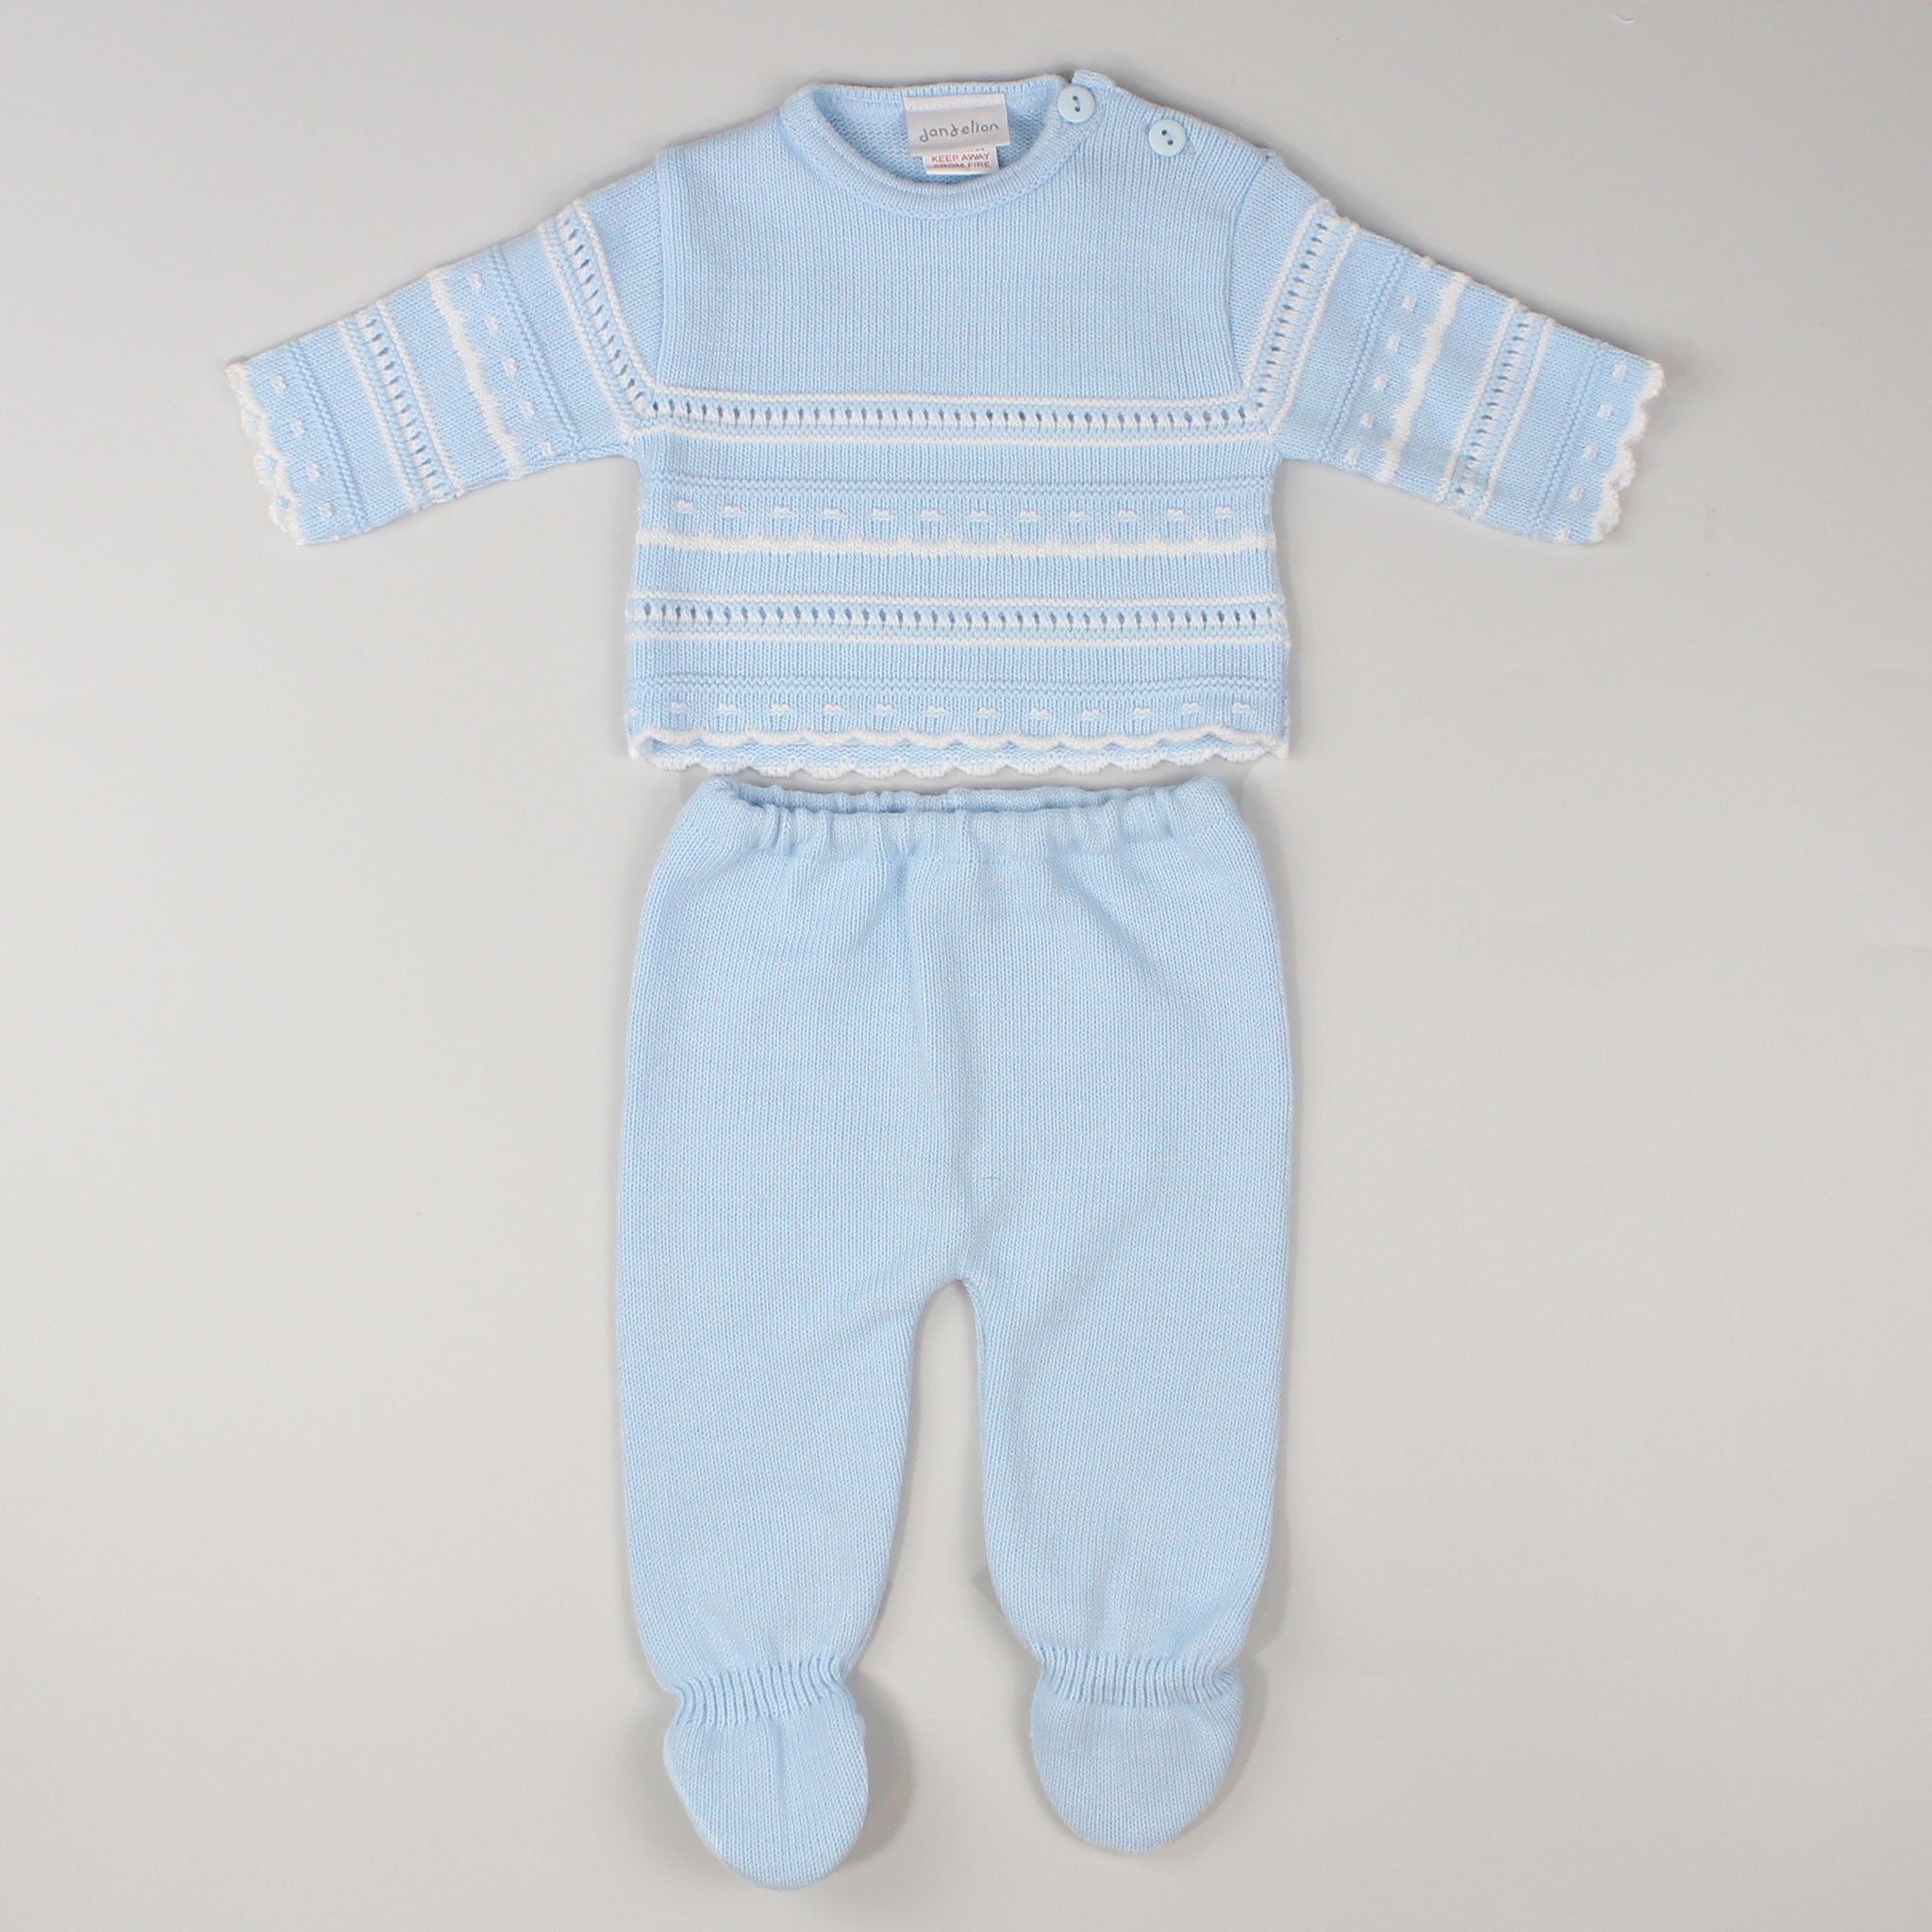 dandelion blue 2 piece knitted outfit